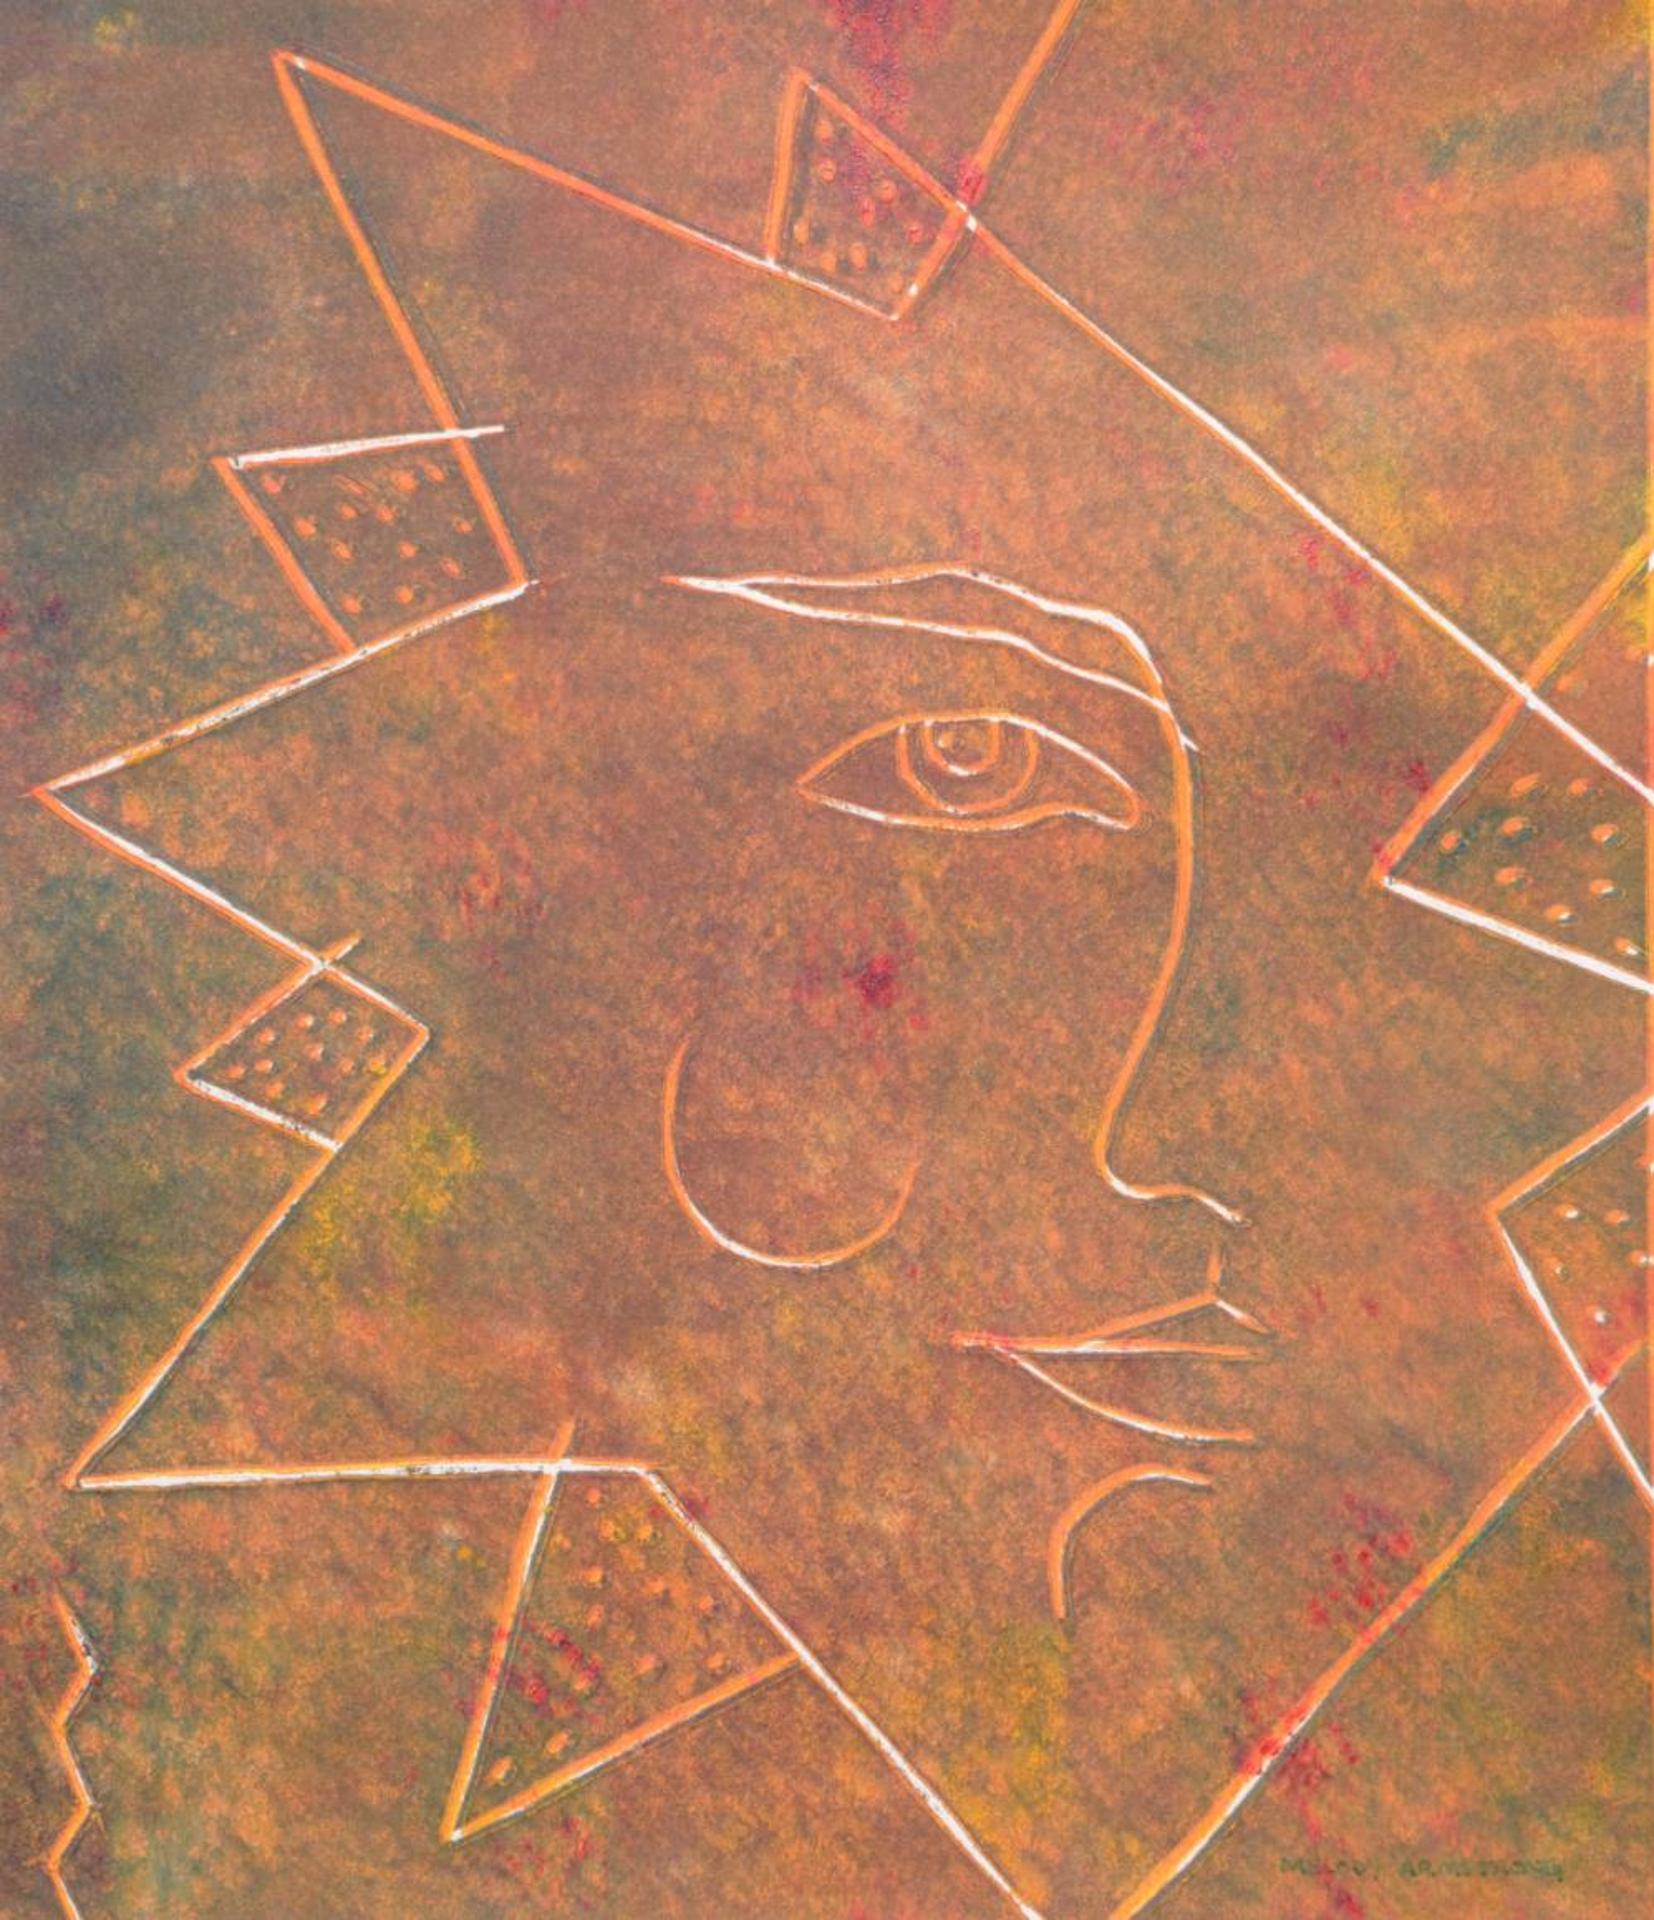 Melody Armstrong (1965) - Untitled - Sun/Face